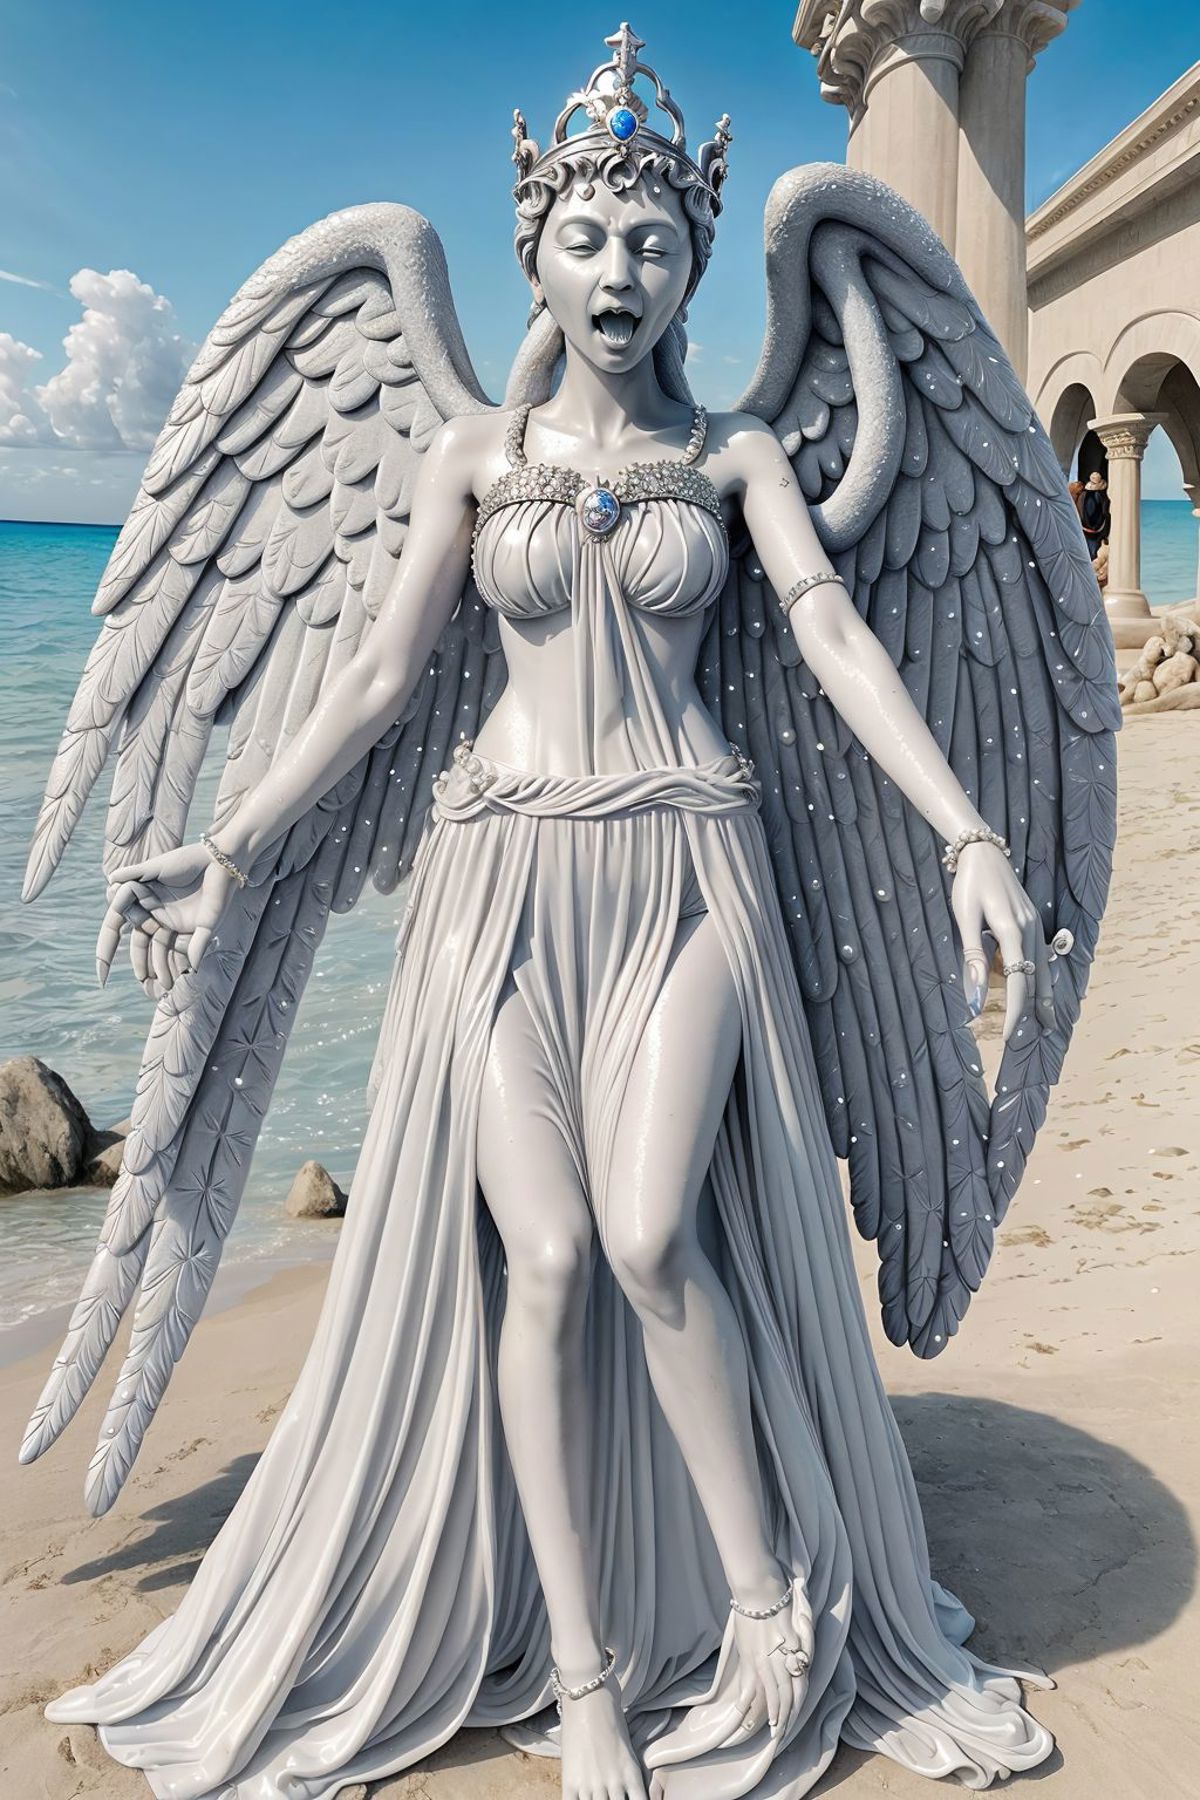 Weeping Angel (Dr Who Monster) image by norod78